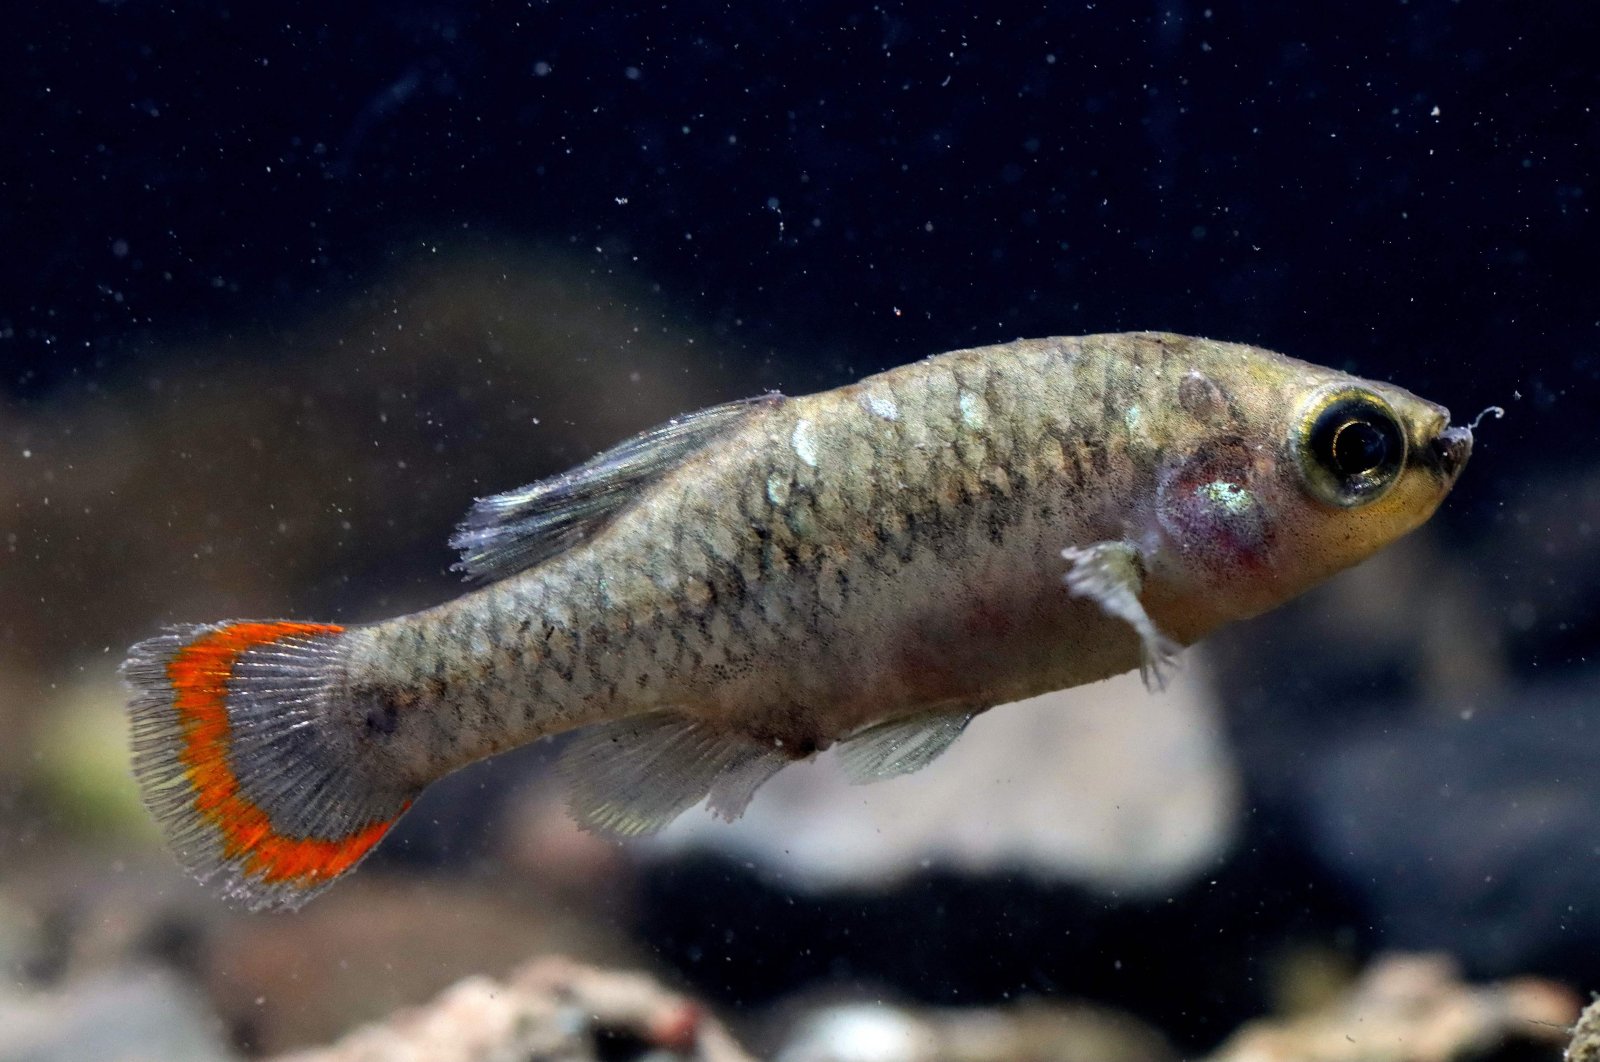 A male Tequila fish (Zoogoneticus Tequila) swimming in a fish tank during a survey of the species that was successfully reintroduced to its natural habitat after disappearing for 20 years from the Teuchitlan river, Teuchitlan, Jalisco state, Mexico, Feb. 15, 2022. (AFP Photo)